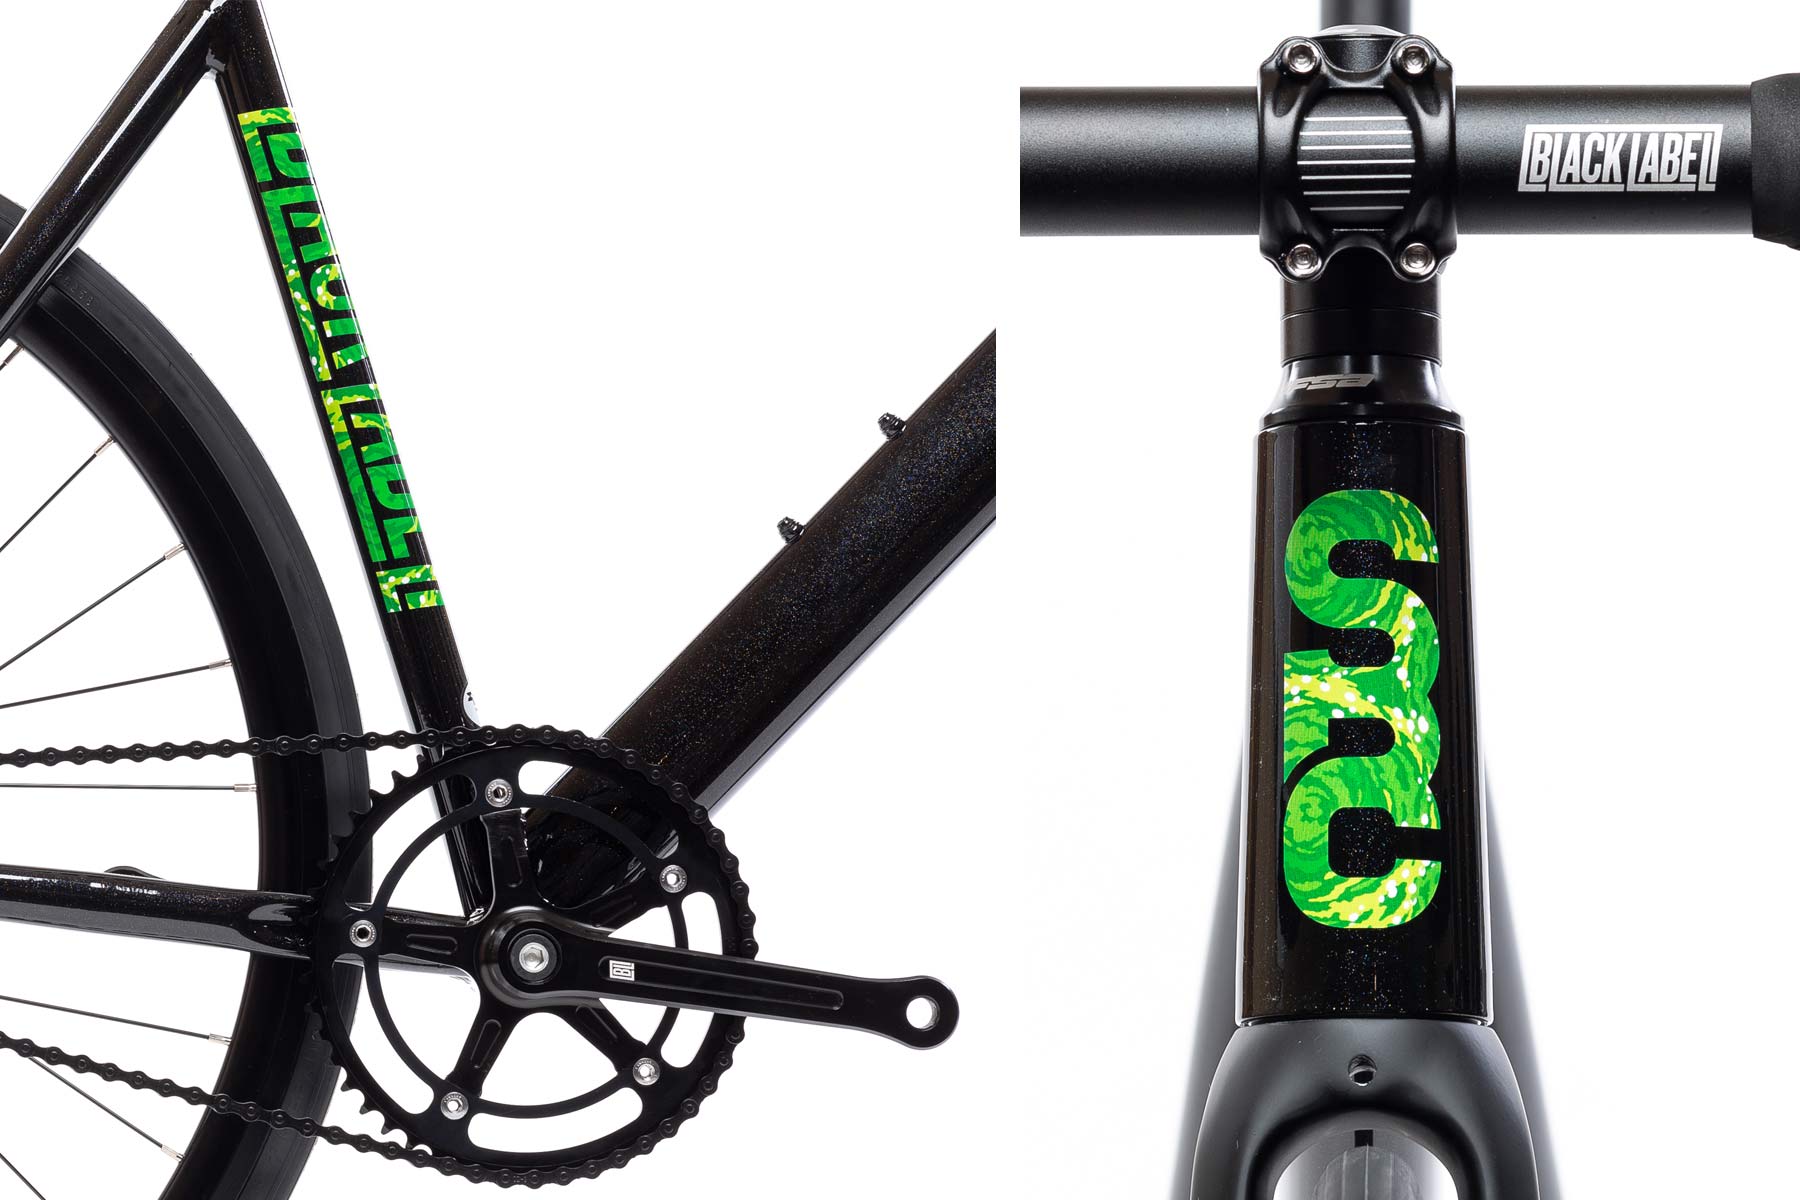 State Bicycle Co x Rick and Morty collection, limited edition interdimensional portal bikes clothing accessories, Black Label details